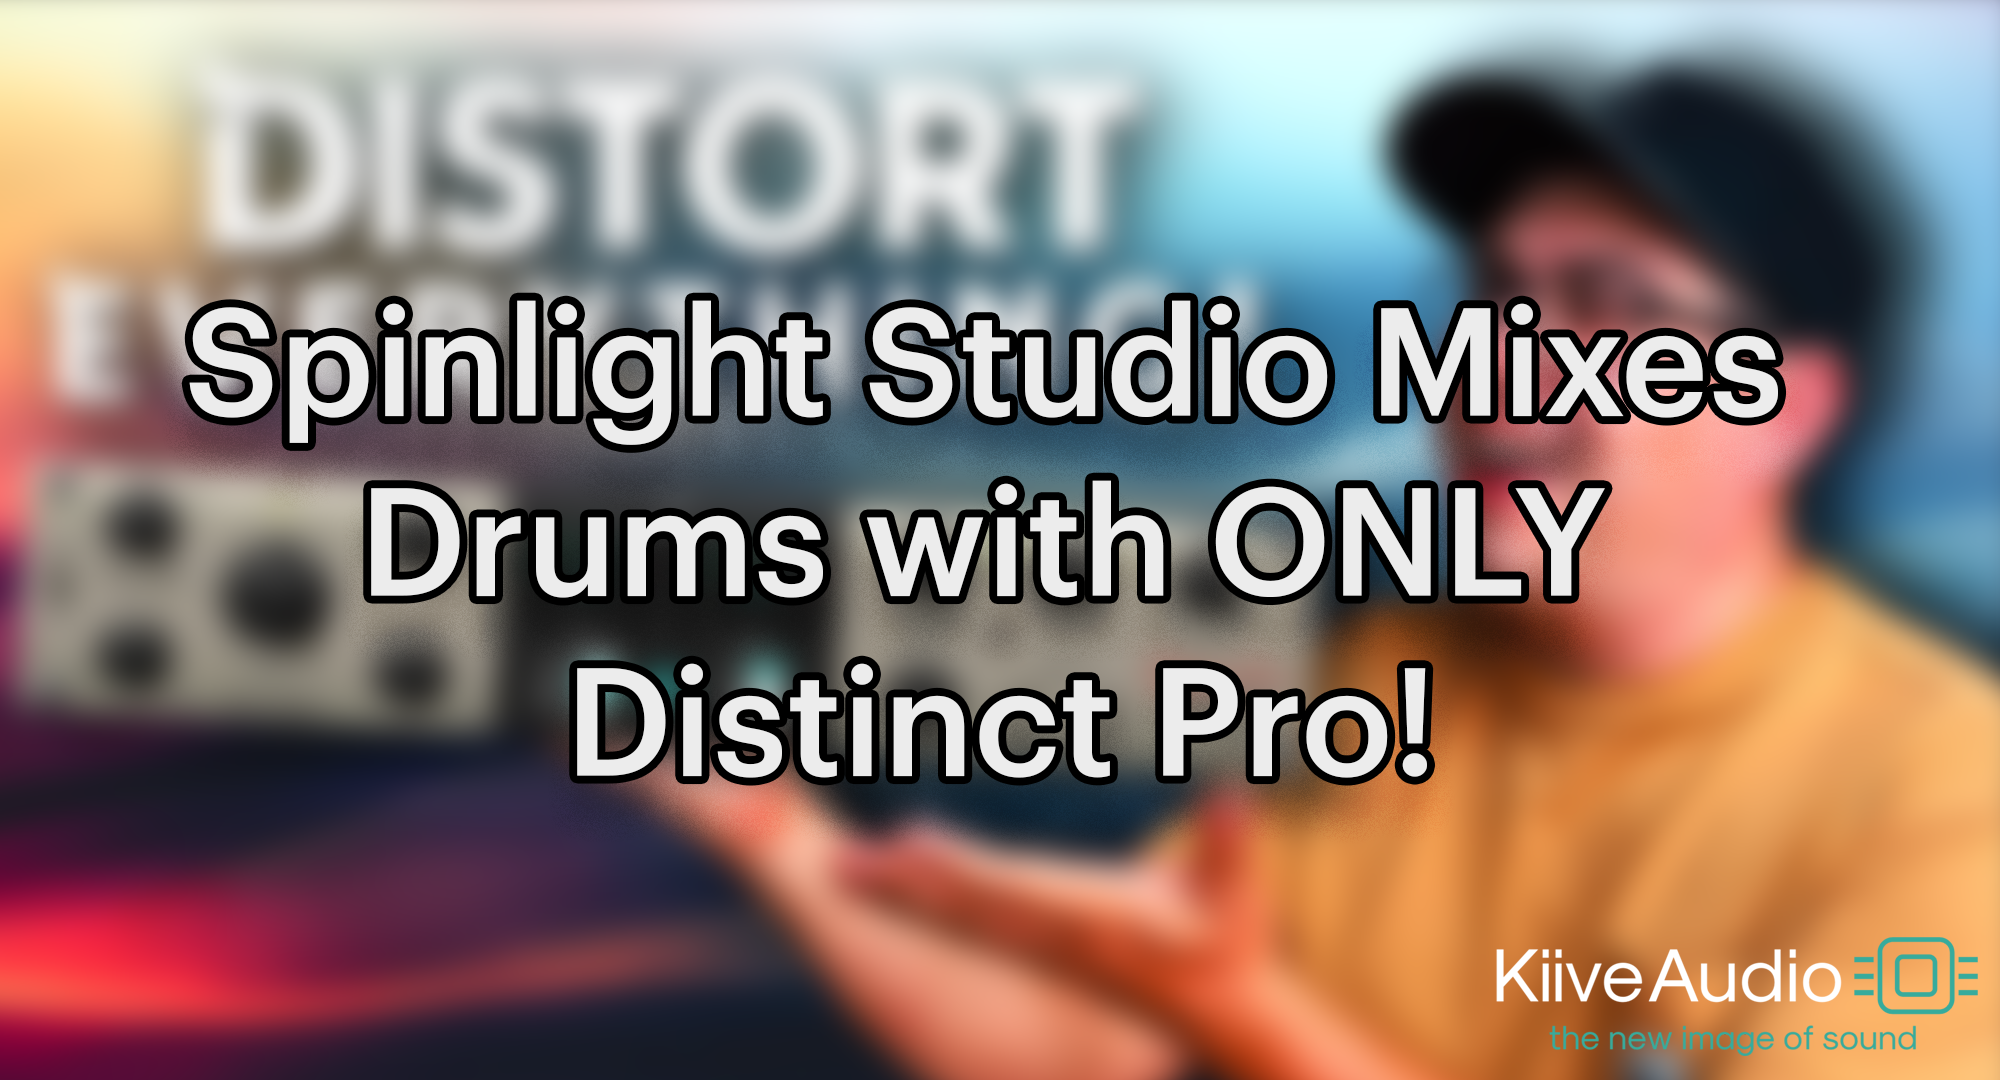 Spinlight Studio Mixes Drums with ONLY Distinct Pro!